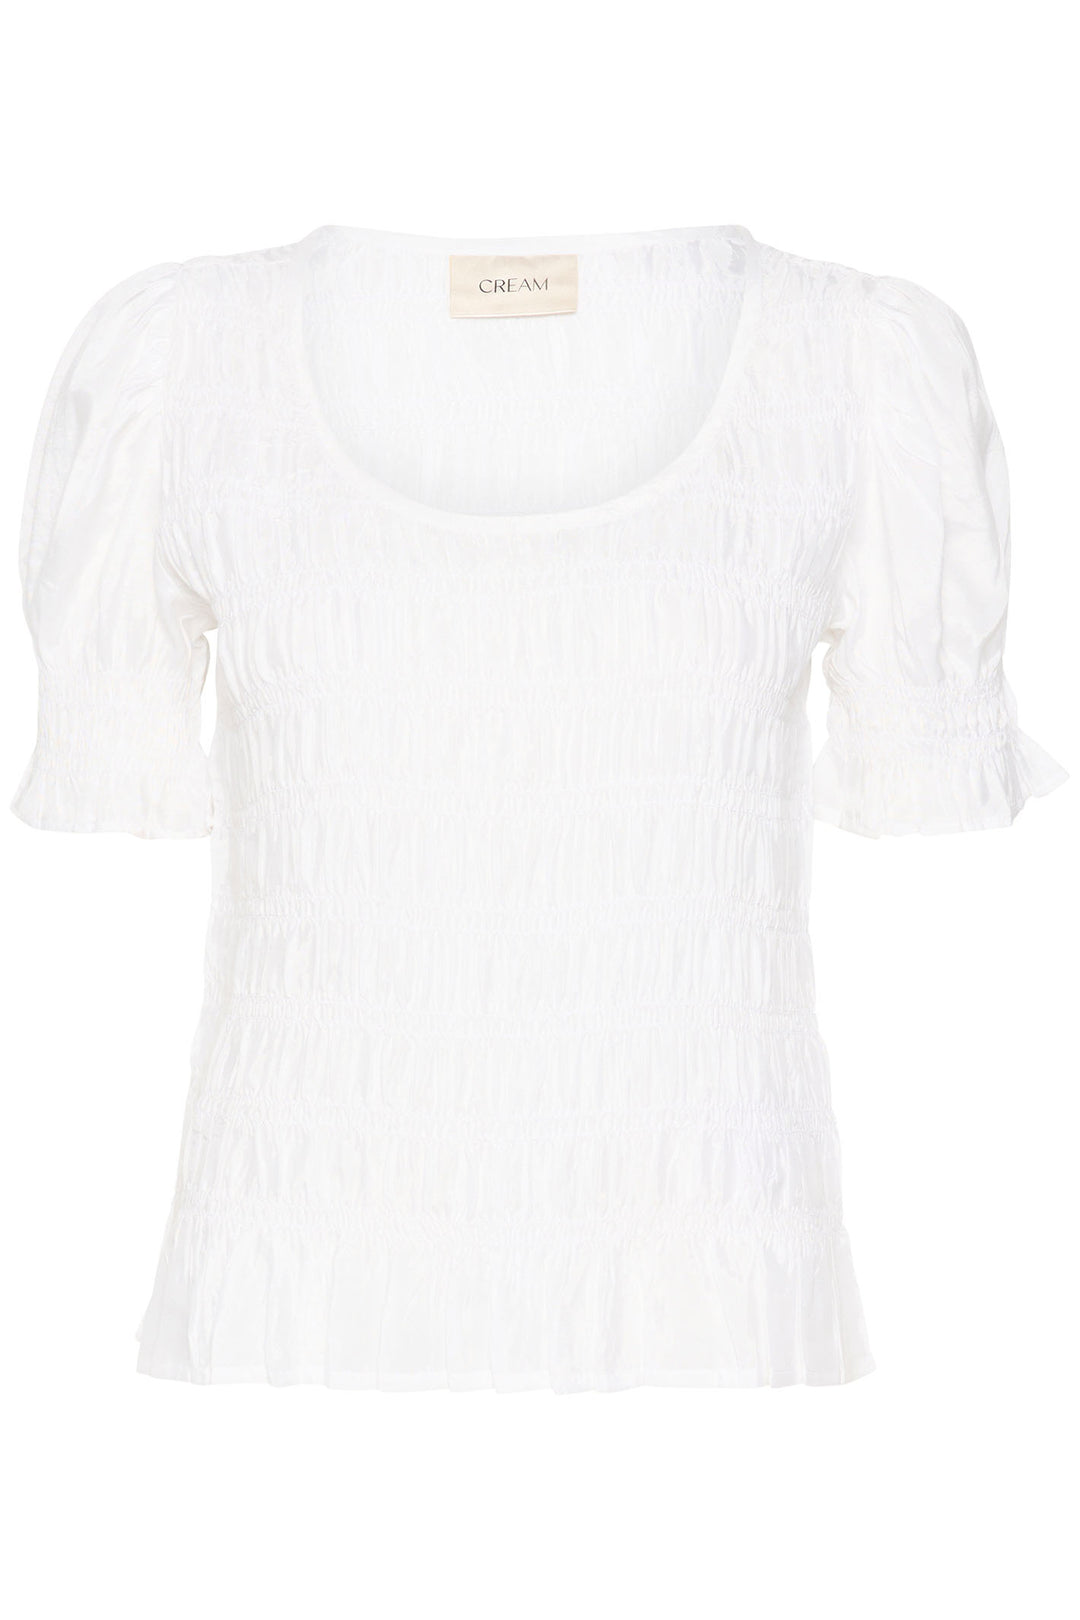 Cream 10612413 CRHenva Snow White Ruched O-Neck Short Sleeve Top - Dotique Chesterfield